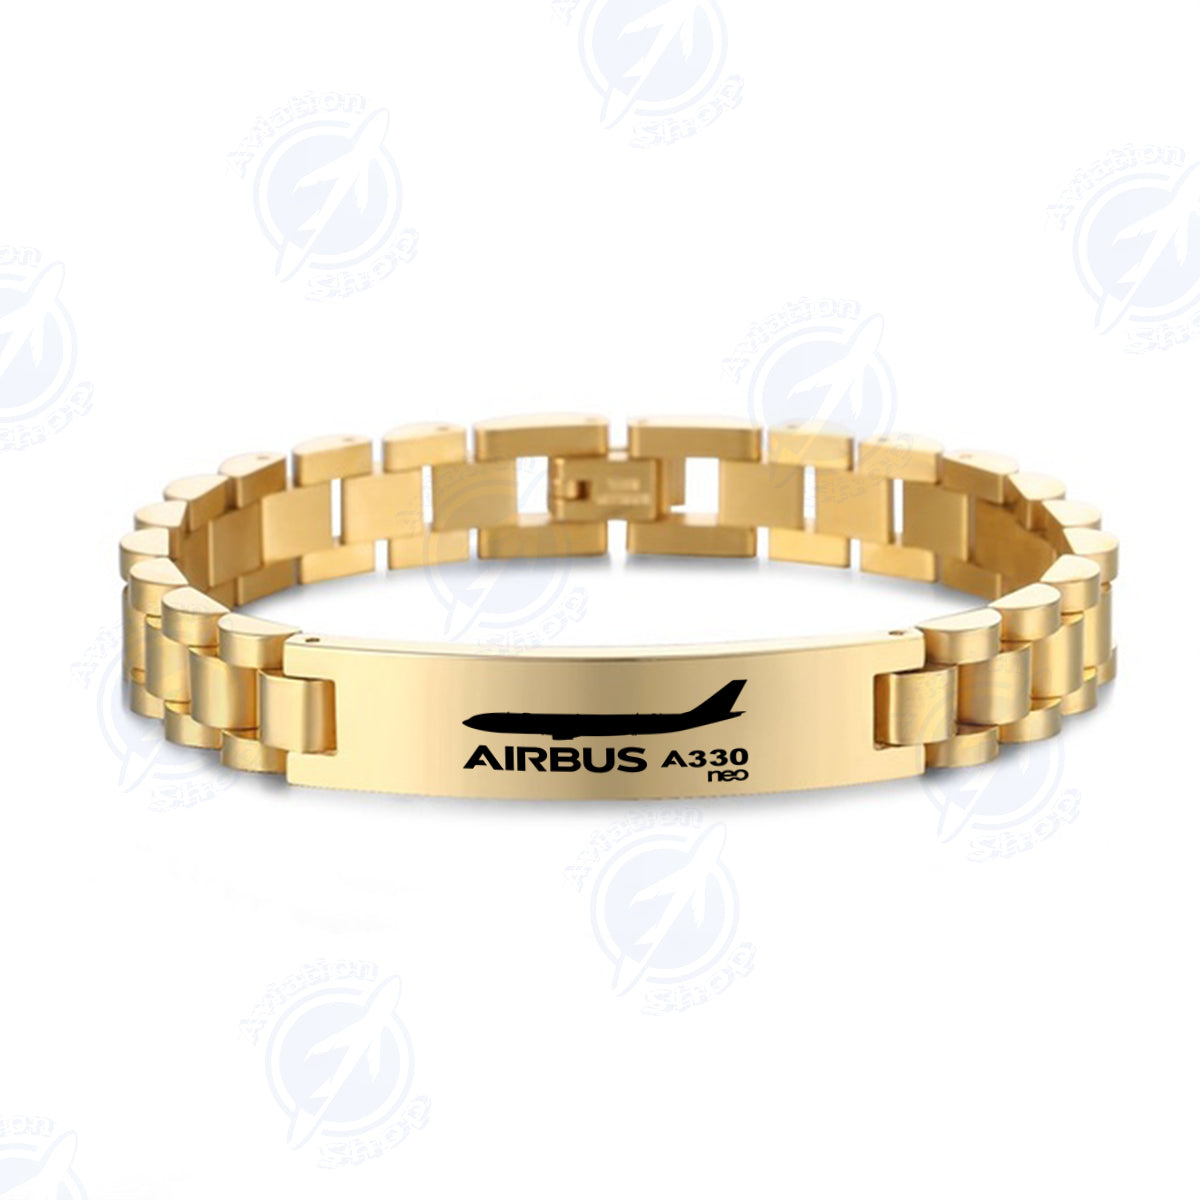 The Airbus A330neo Designed Stainless Steel Chain Bracelets